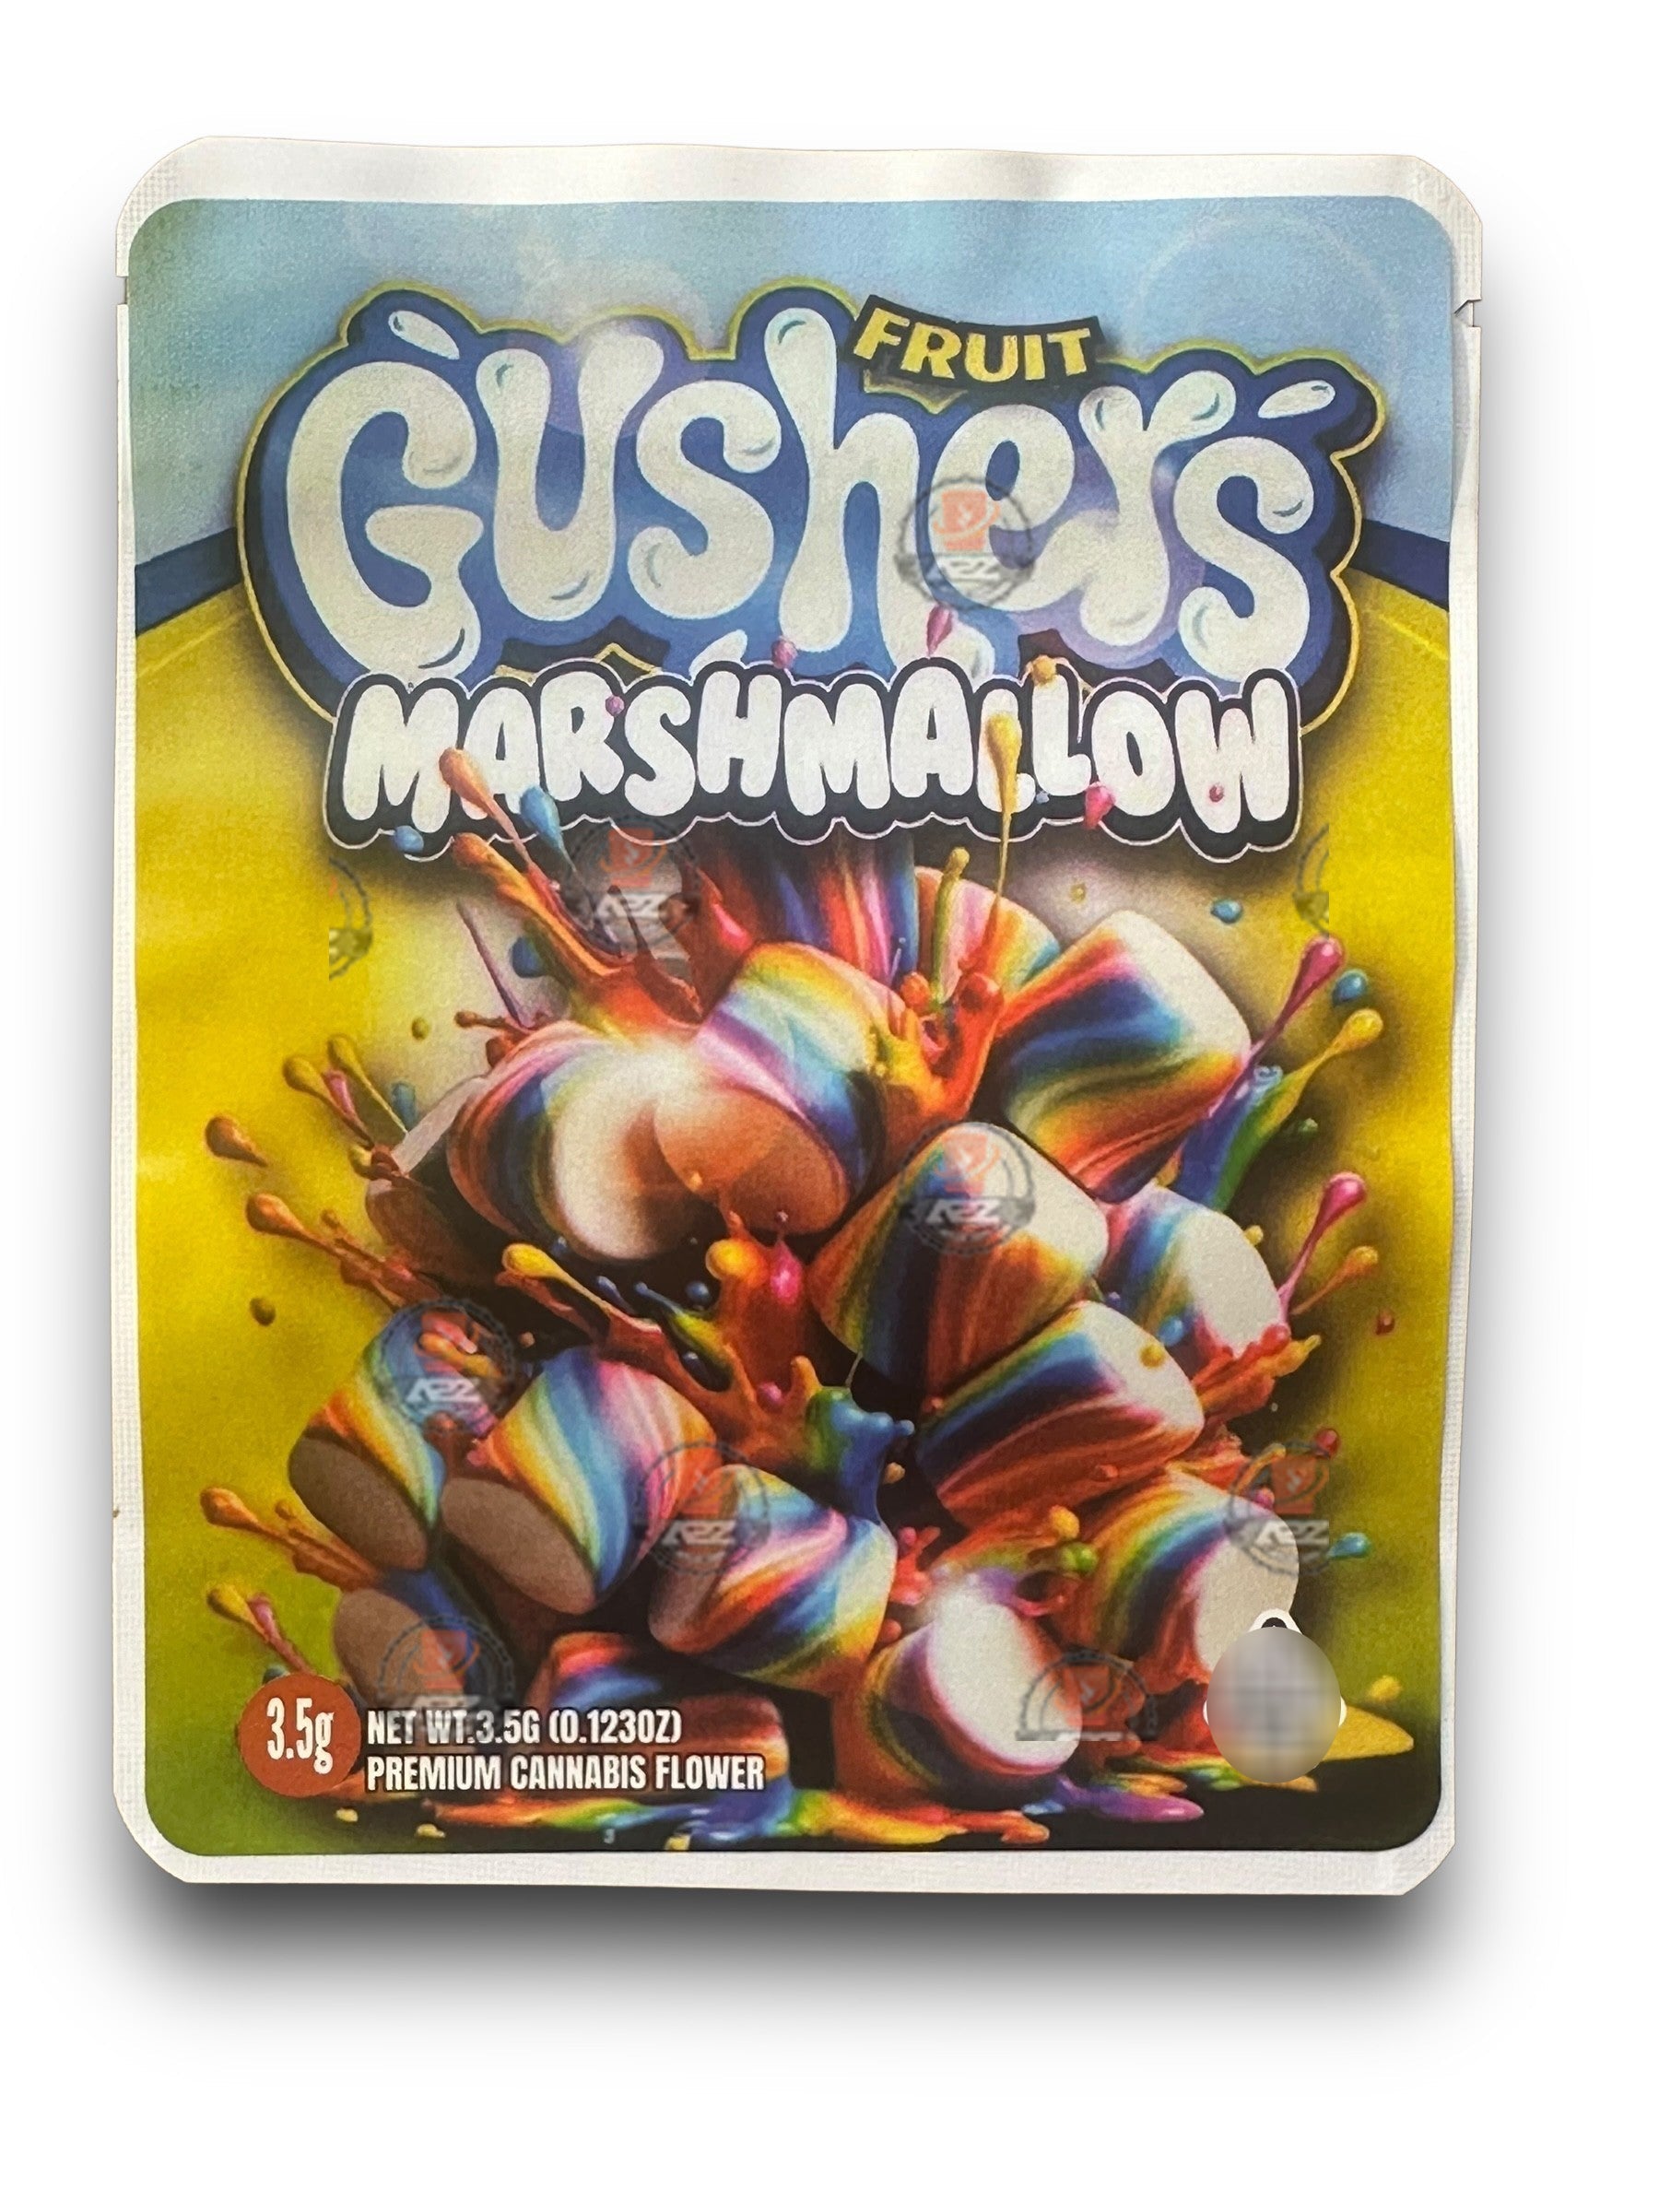 Sprinklez Fruit Gushers Marshmallow 3.5G Mylar Bags -With stickers and label